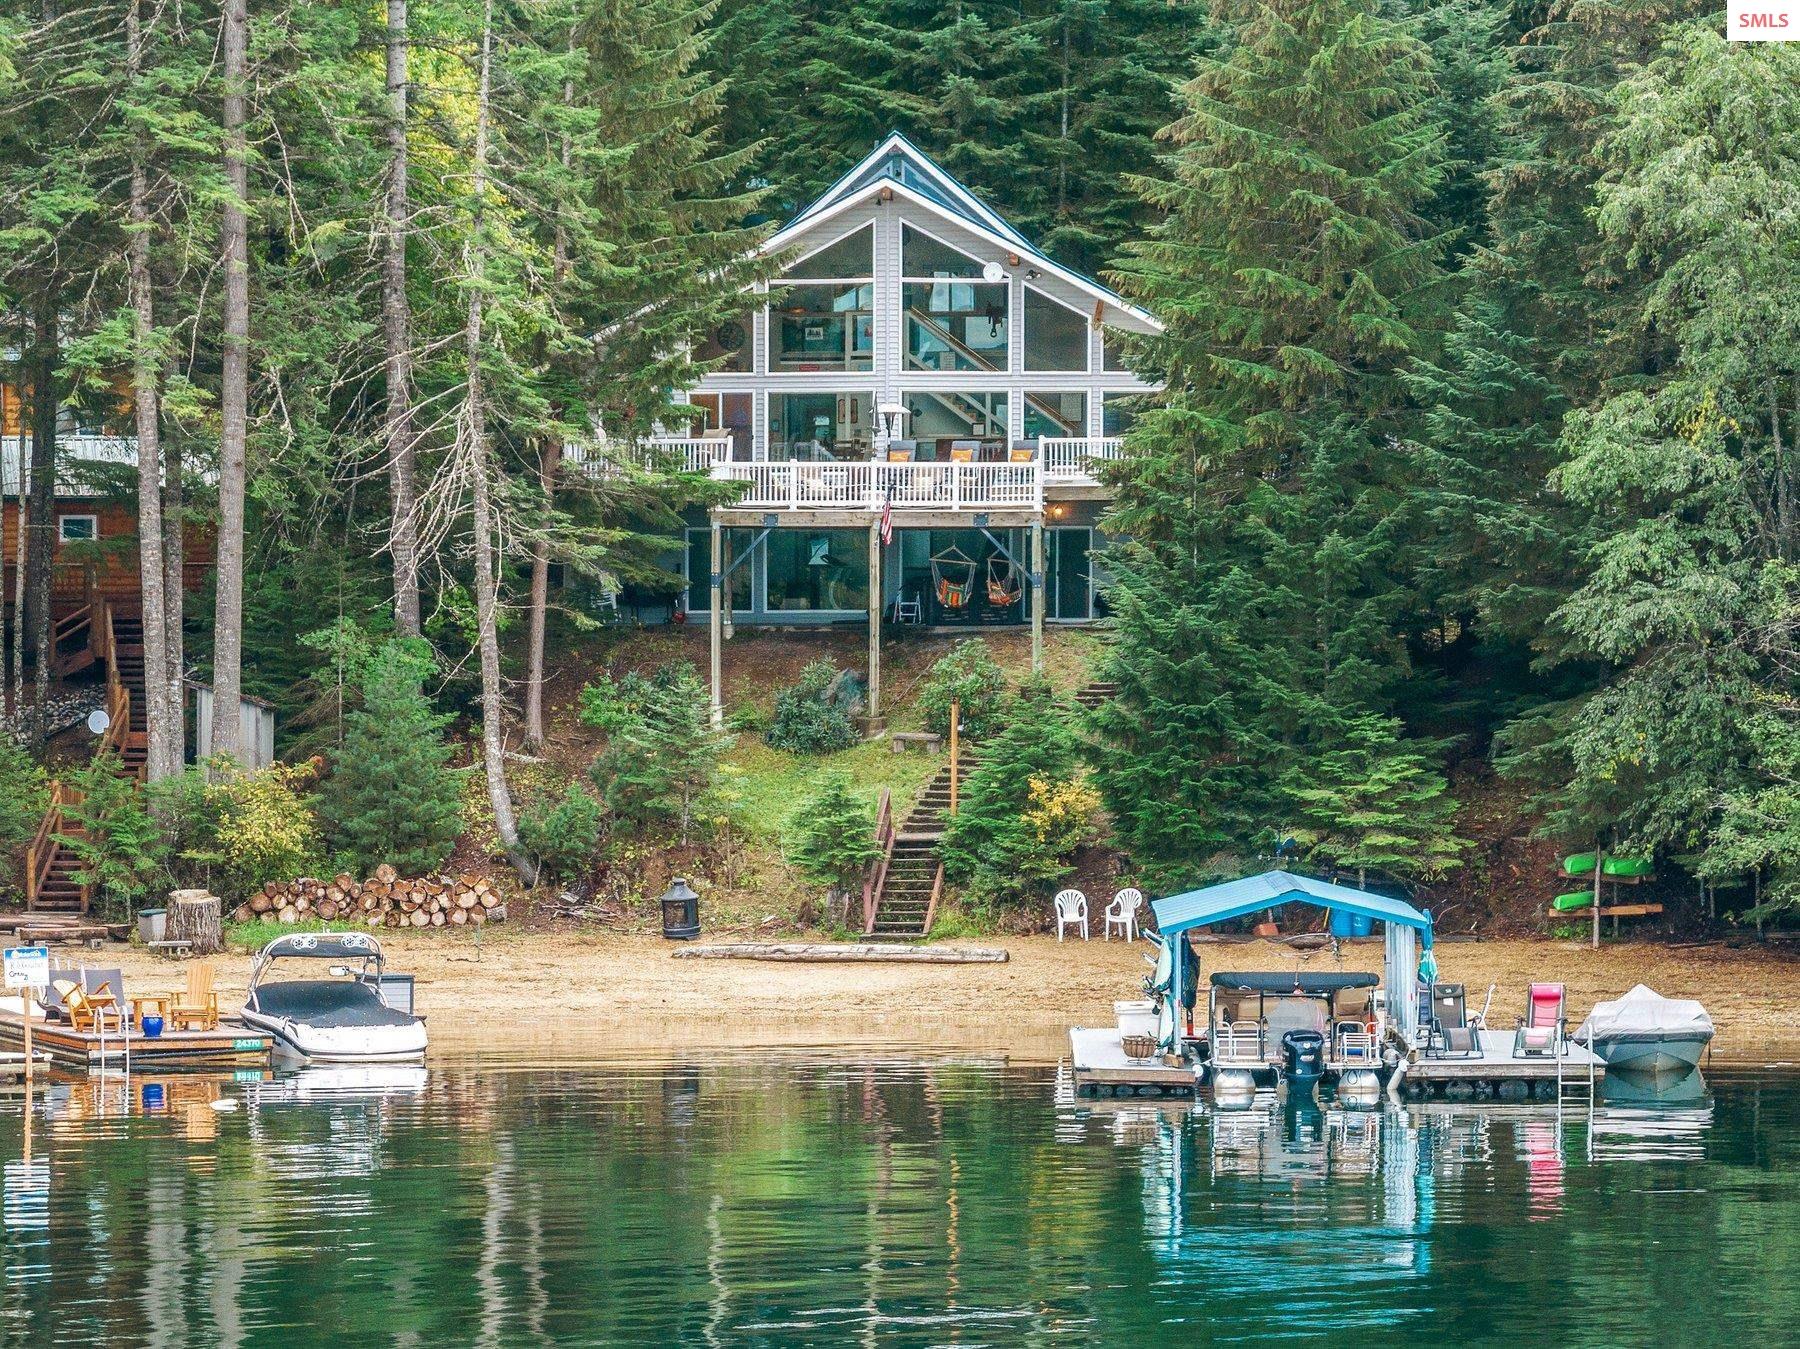 Create your own memories in Speakeasy Cove on Hayden Lake! This well-loved home is nestled on a large .59 acre wooded lot with 100' of RARE sandy-beach waterfront and complete with a boat dock! The main level features a master suite, bedroom, bathroom, and an open-concept kitchen & living room with floor to ceiling windows to enjoy the spectacular views with direct access to the expansive deck overlooking the lake. The lower level features a bedroom, bathroom, laundry, storage room, and a large family room with direct access to the lower covered patio. Upstairs you'll find the spacious loft that offers stunning lake views from a higher viewpoint. Numerous details and upgrades including gorgeous tongue & groove ceilings in the main living area, new flooring in the kitchen and basement, chef-inspired professional range, new 24kw Cummins backup generator & electric panel, new raised-seam lifetime metal roof and more. The 35'x26' deck has been re-cabled, re-surfaced with composite decking